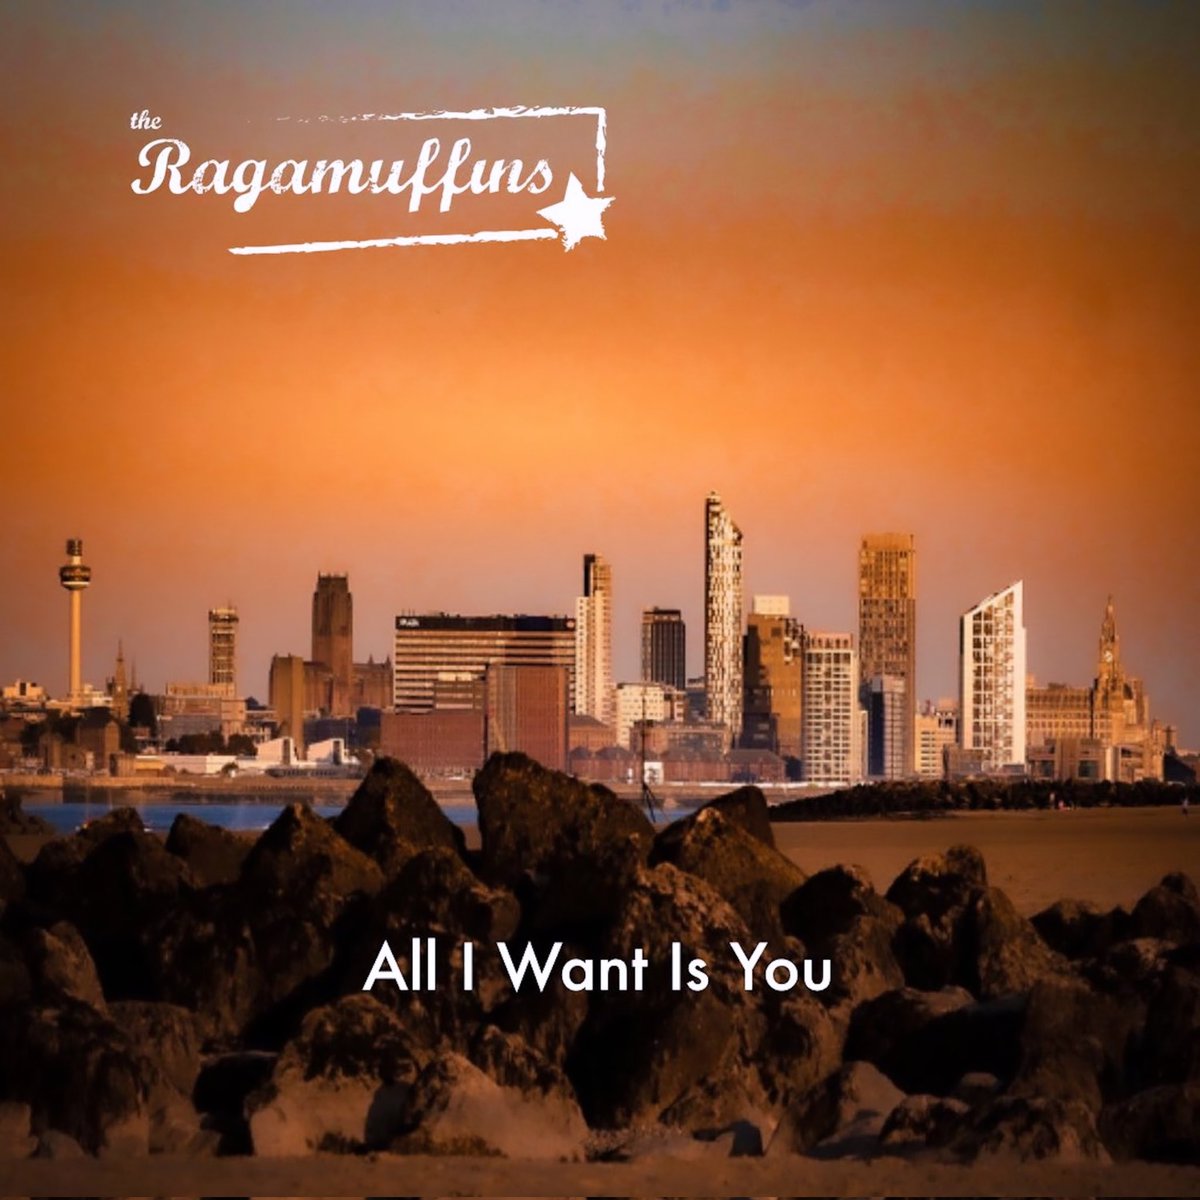 'Baby I love this city, more than a feeling you can scrawl on a t-shirt' Out TODAY and with artwork by @LifeinPhotosJen is 'ALL I WANT IS YOU' - please listen, save, stream and share! Hope you love it! #NewMusic #LIVERPOOL #theragamuffins #Auroraborealis open.spotify.com/track/5eakqVBj…